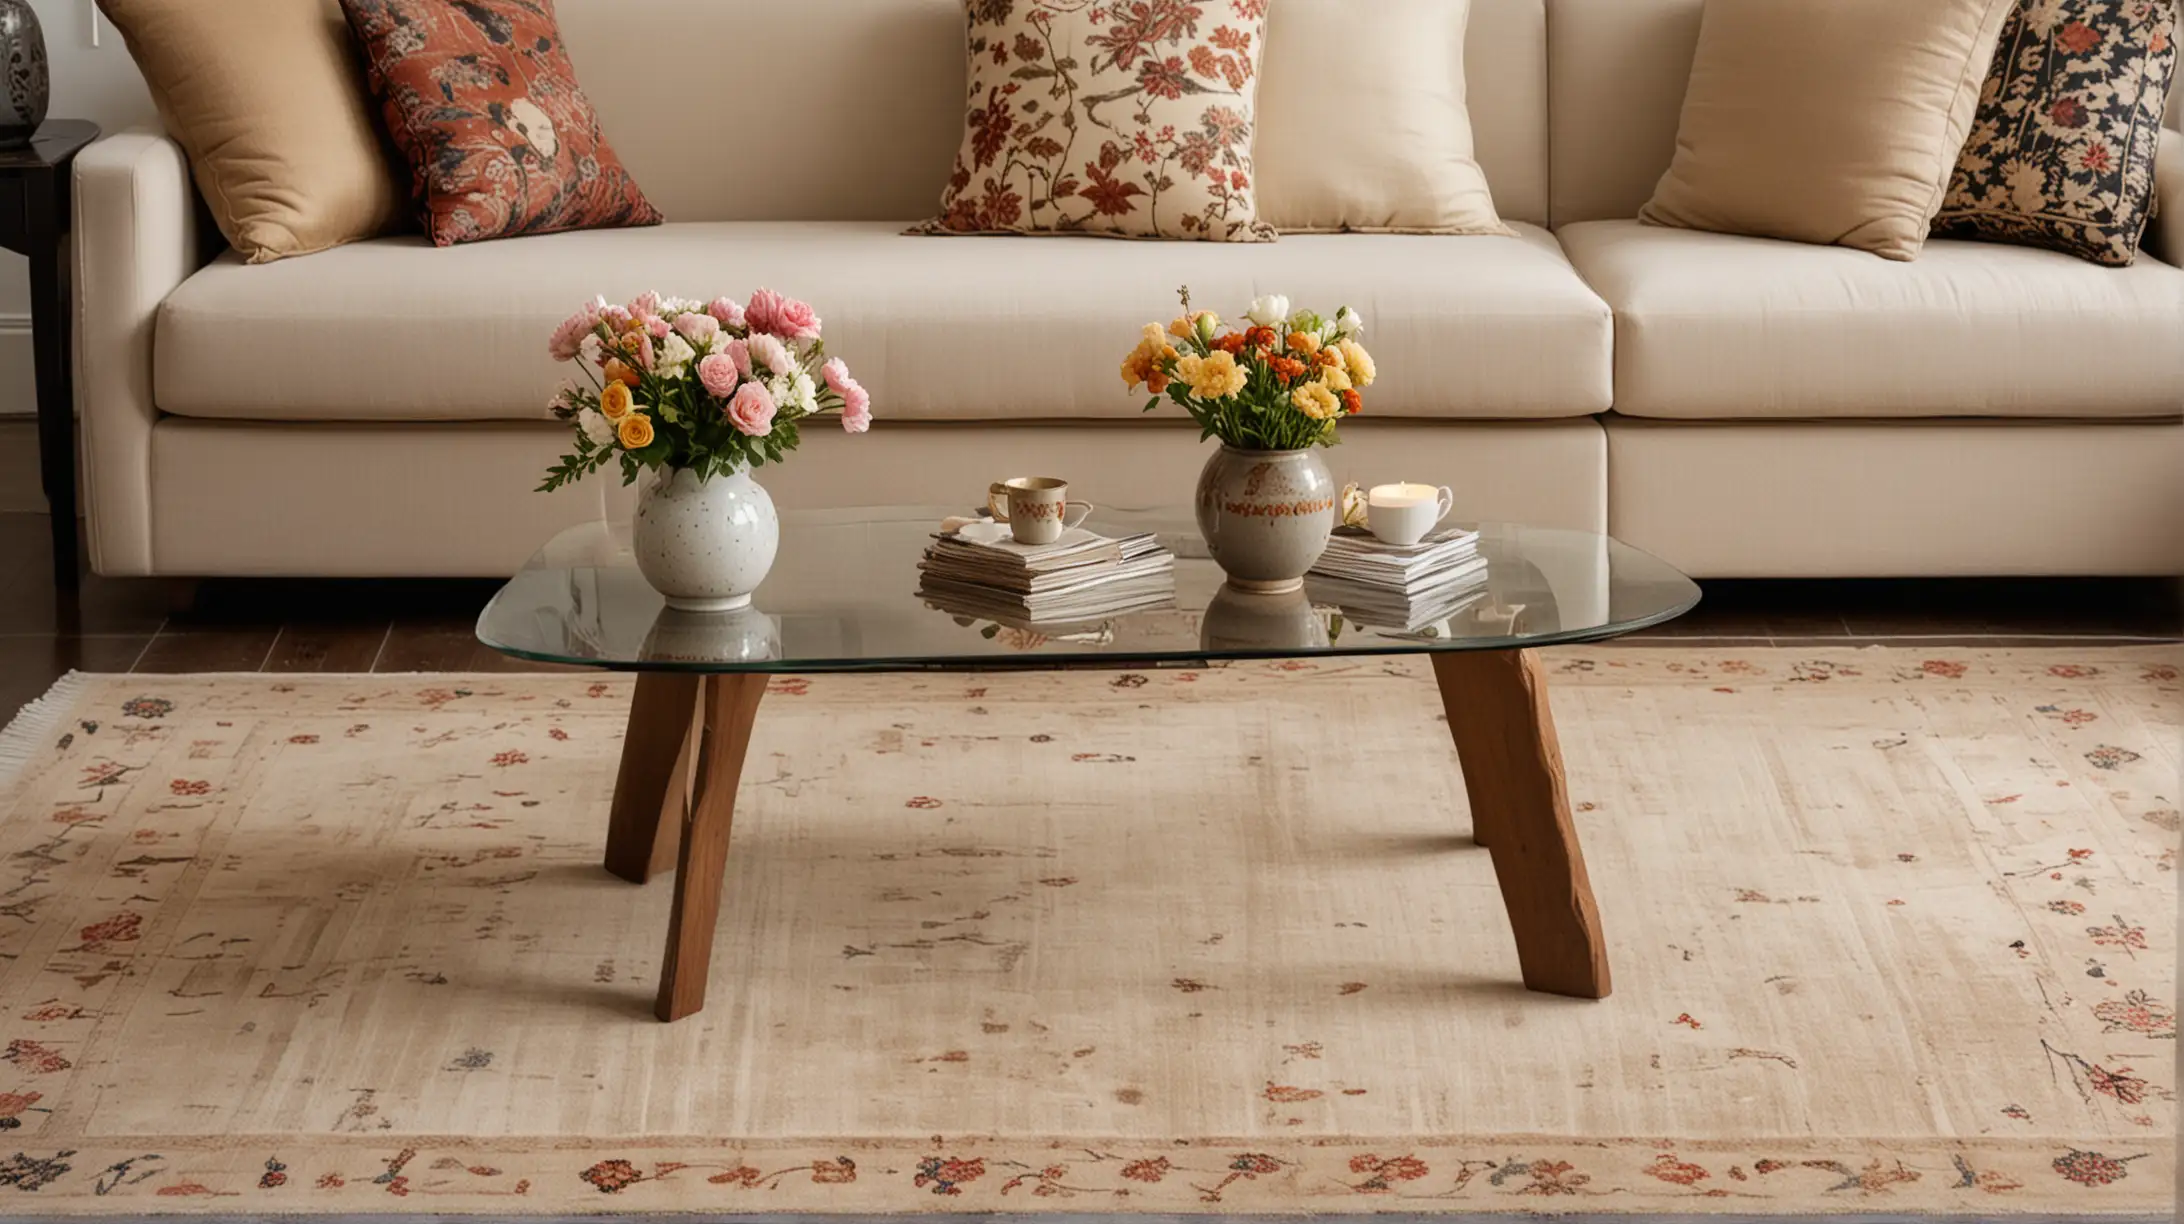 Cozy Living Room Decor Flower Vase on Coffee Table with LightColored Asian Rug